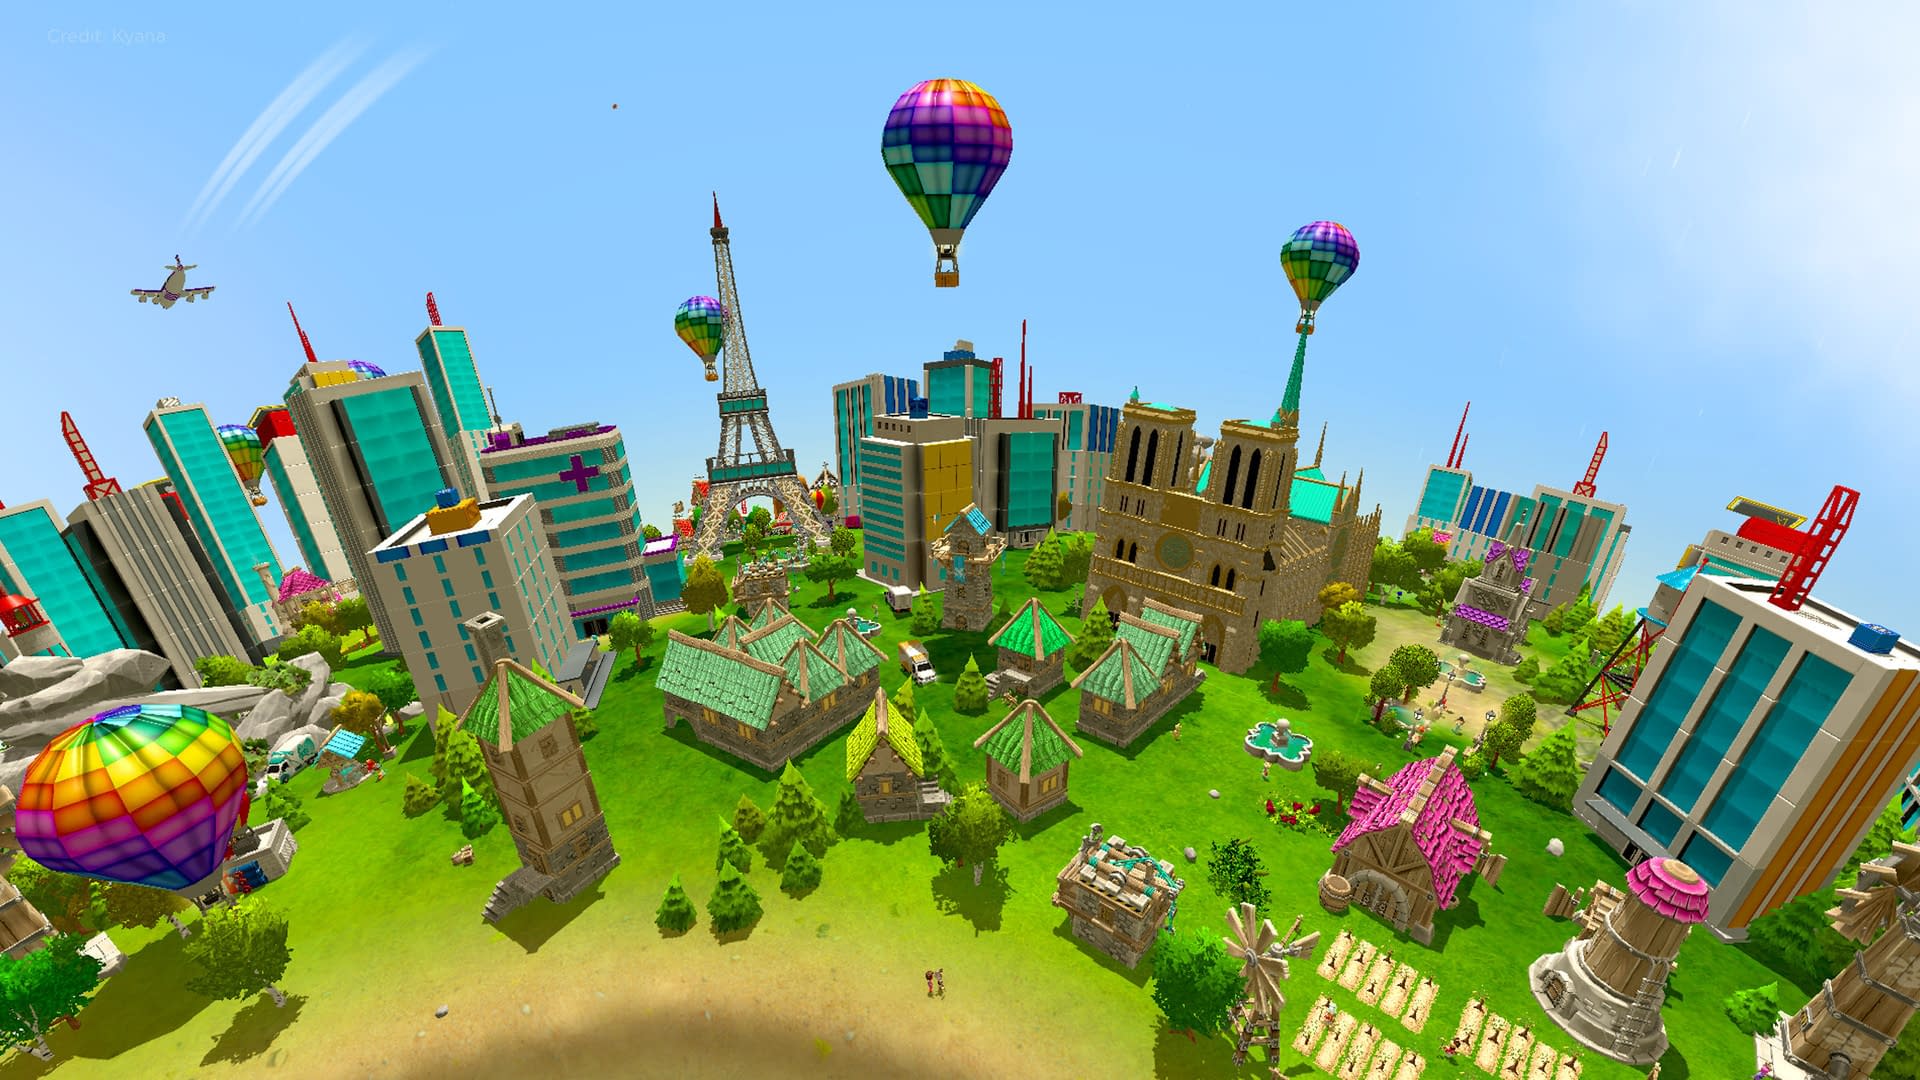 With The Universim, you can create the world you want